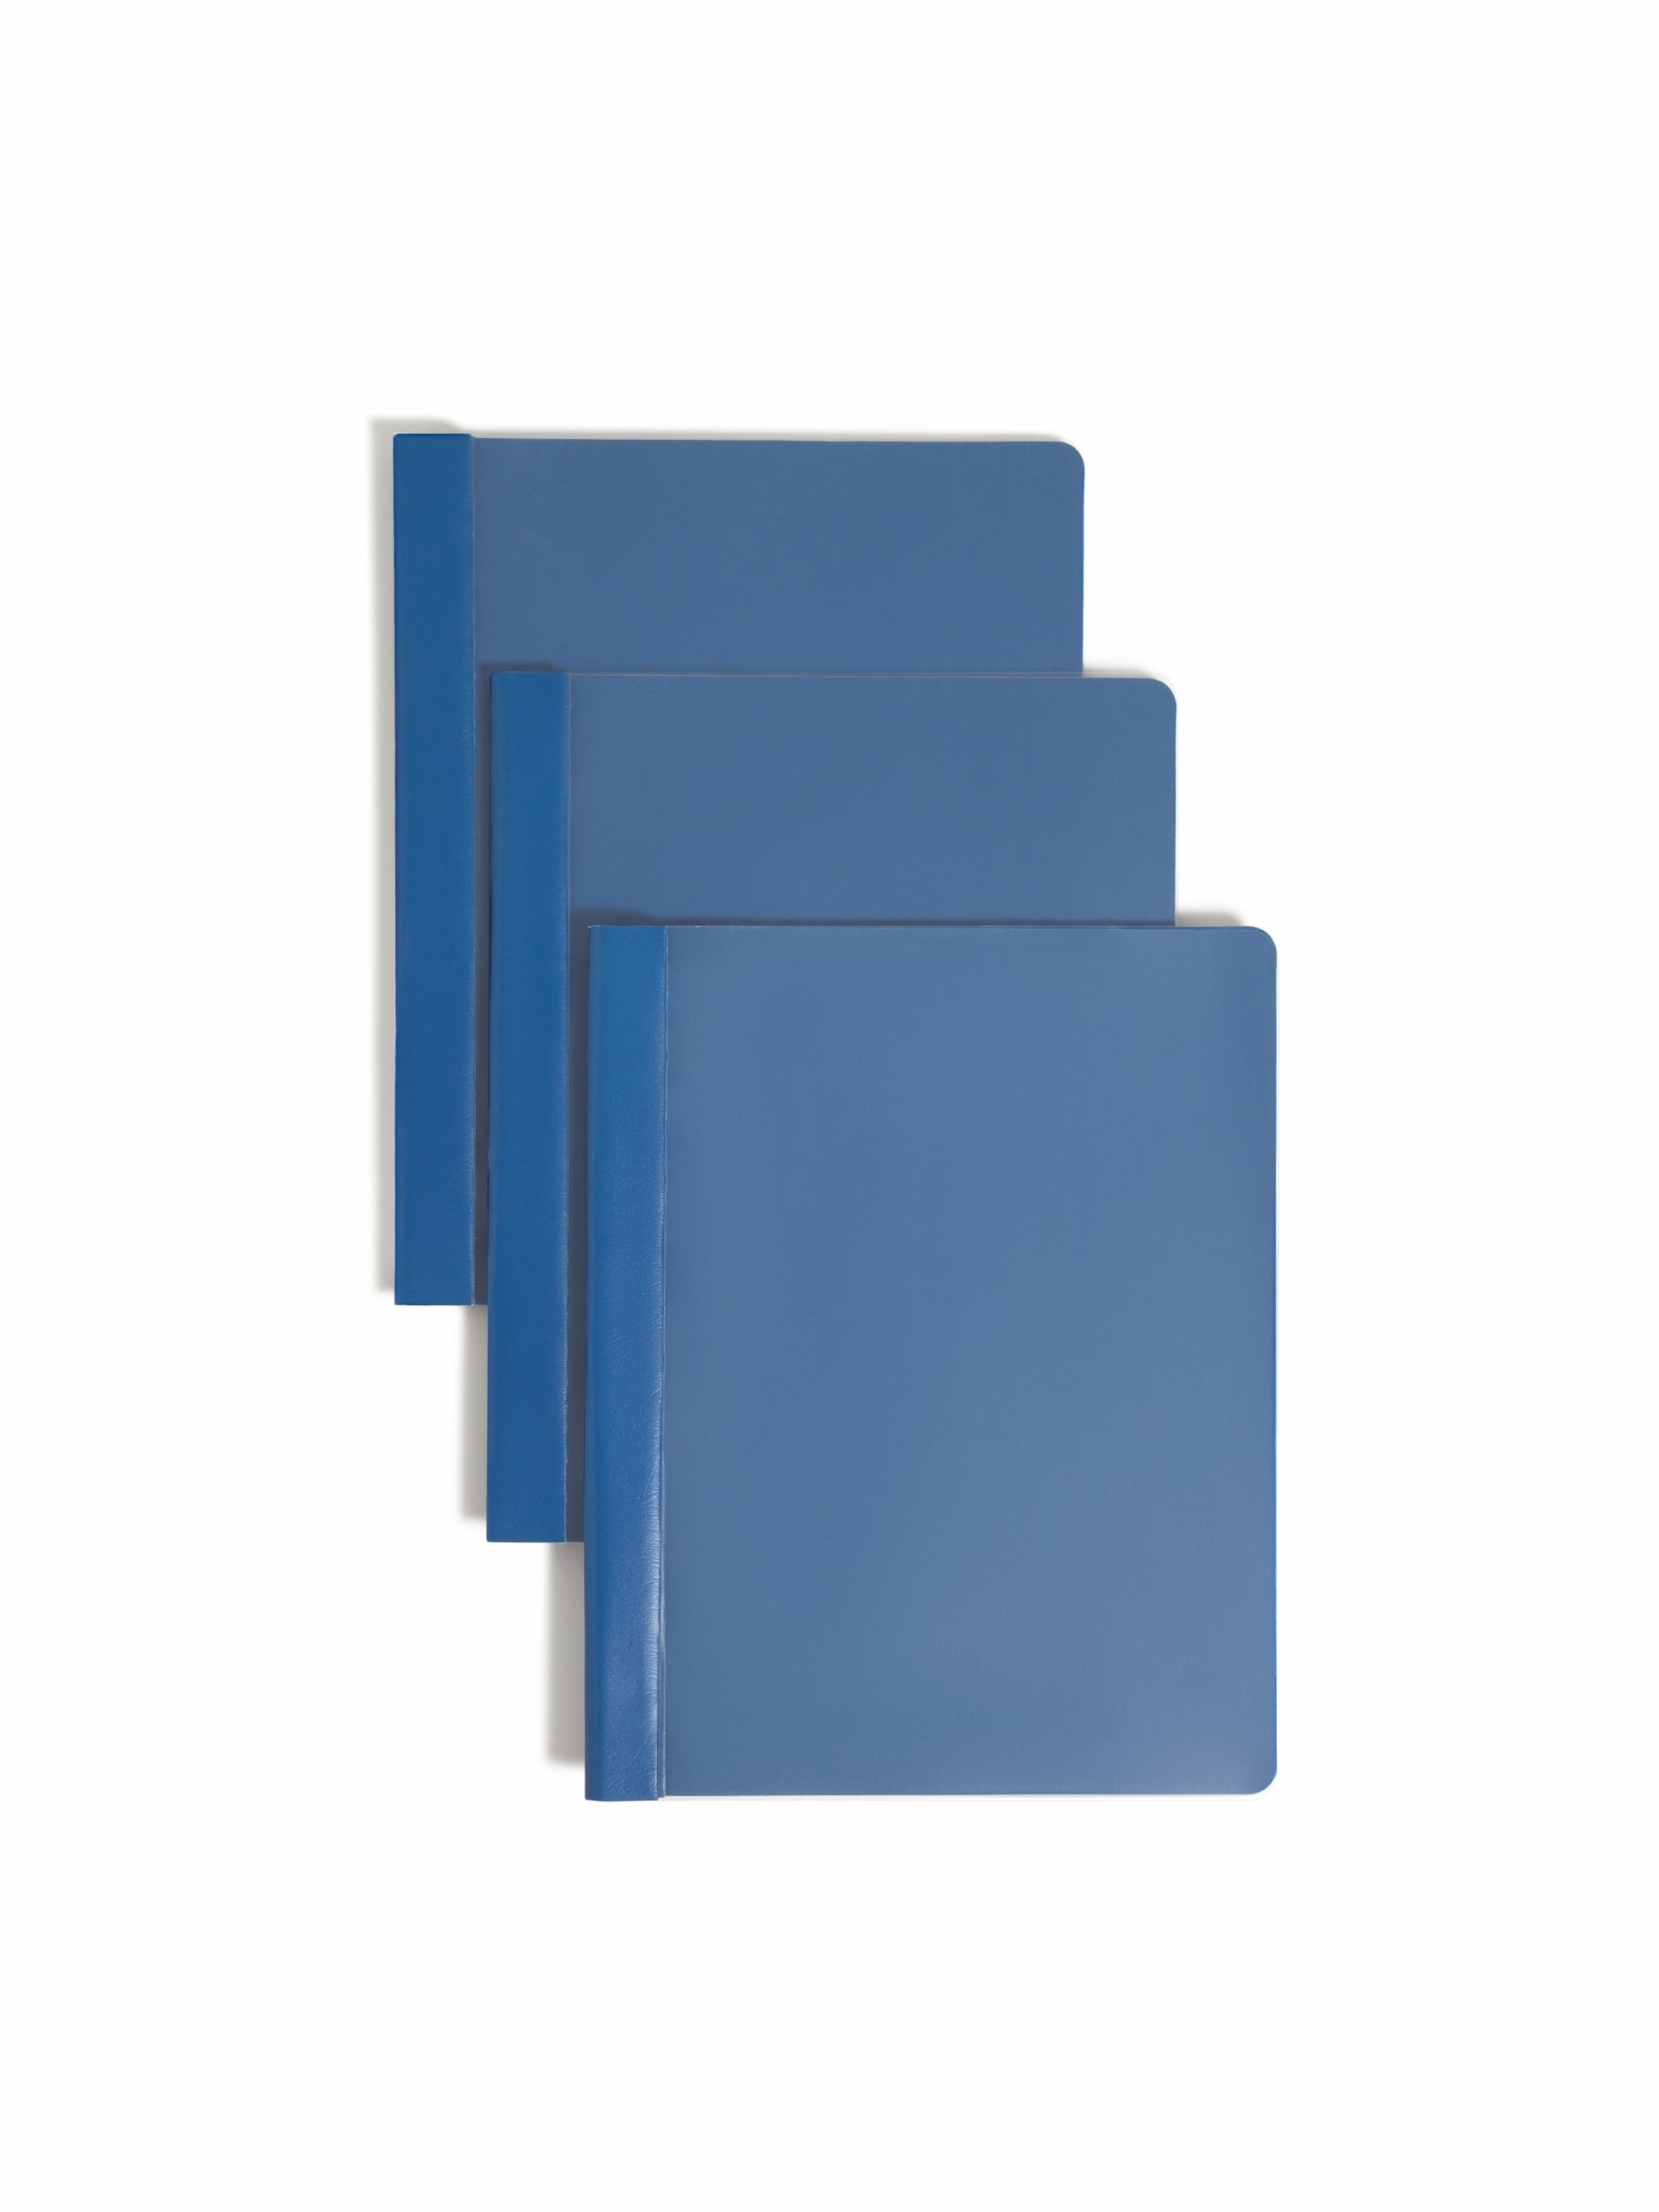 Heavyweight Paper Report Covers with Clear Front, Dark Blue Color, Letter Size, Set of 0, 30086486874558